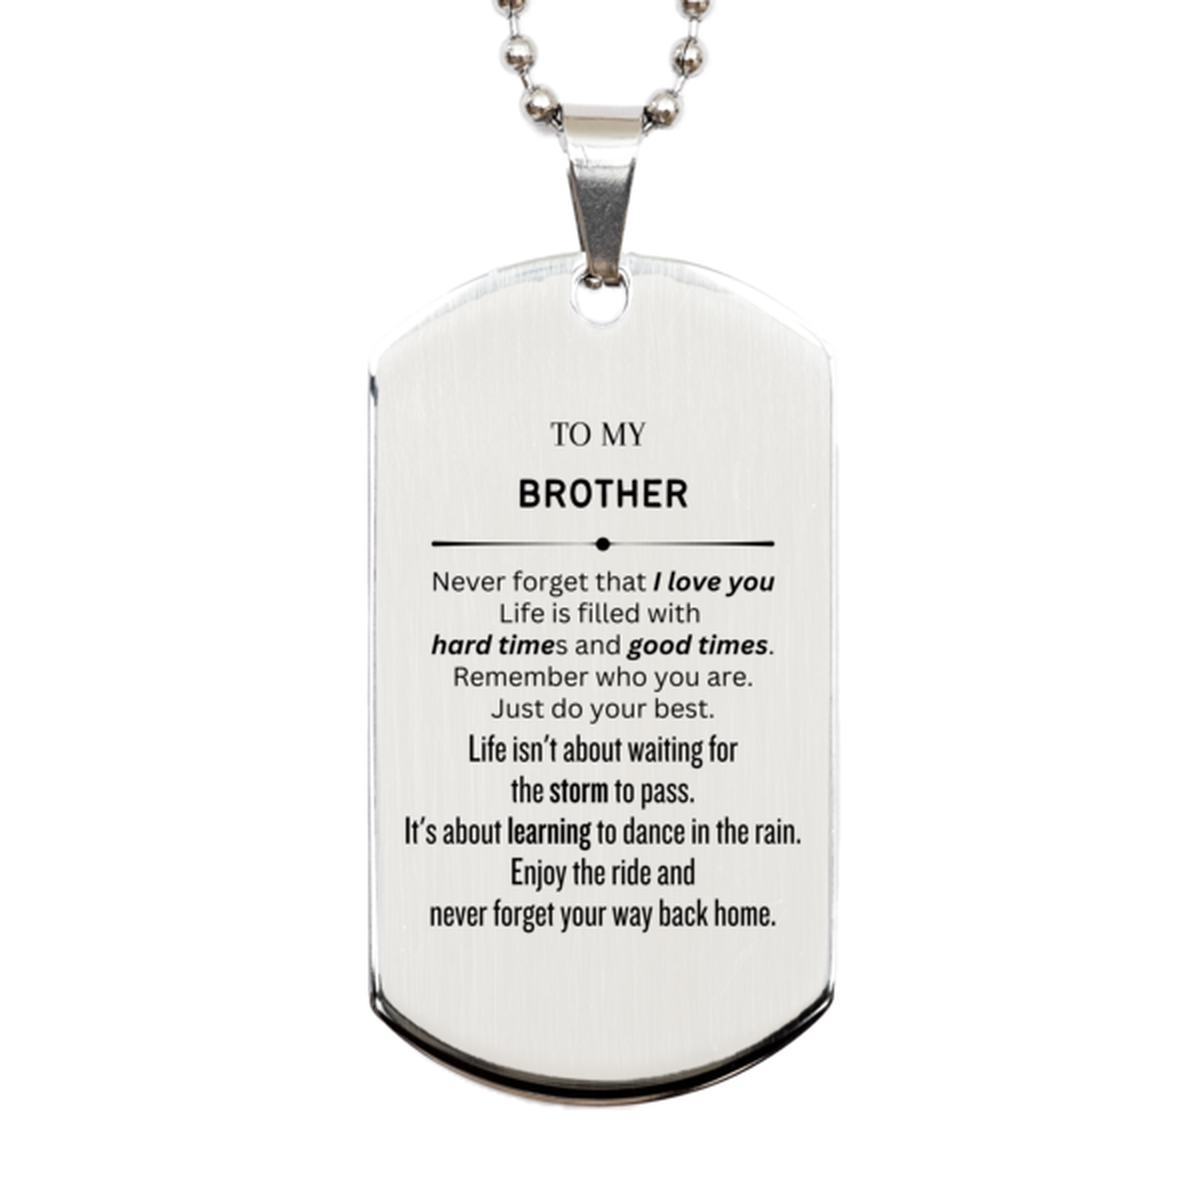 Christmas Brother Silver Dog Tag Gifts, To My Brother Birthday Thank You Gifts For Brother, Graduation Unique Gifts For Brother To My Brother Never forget that I love you life is filled with hard times and good times. Remember who you are. Just do your be